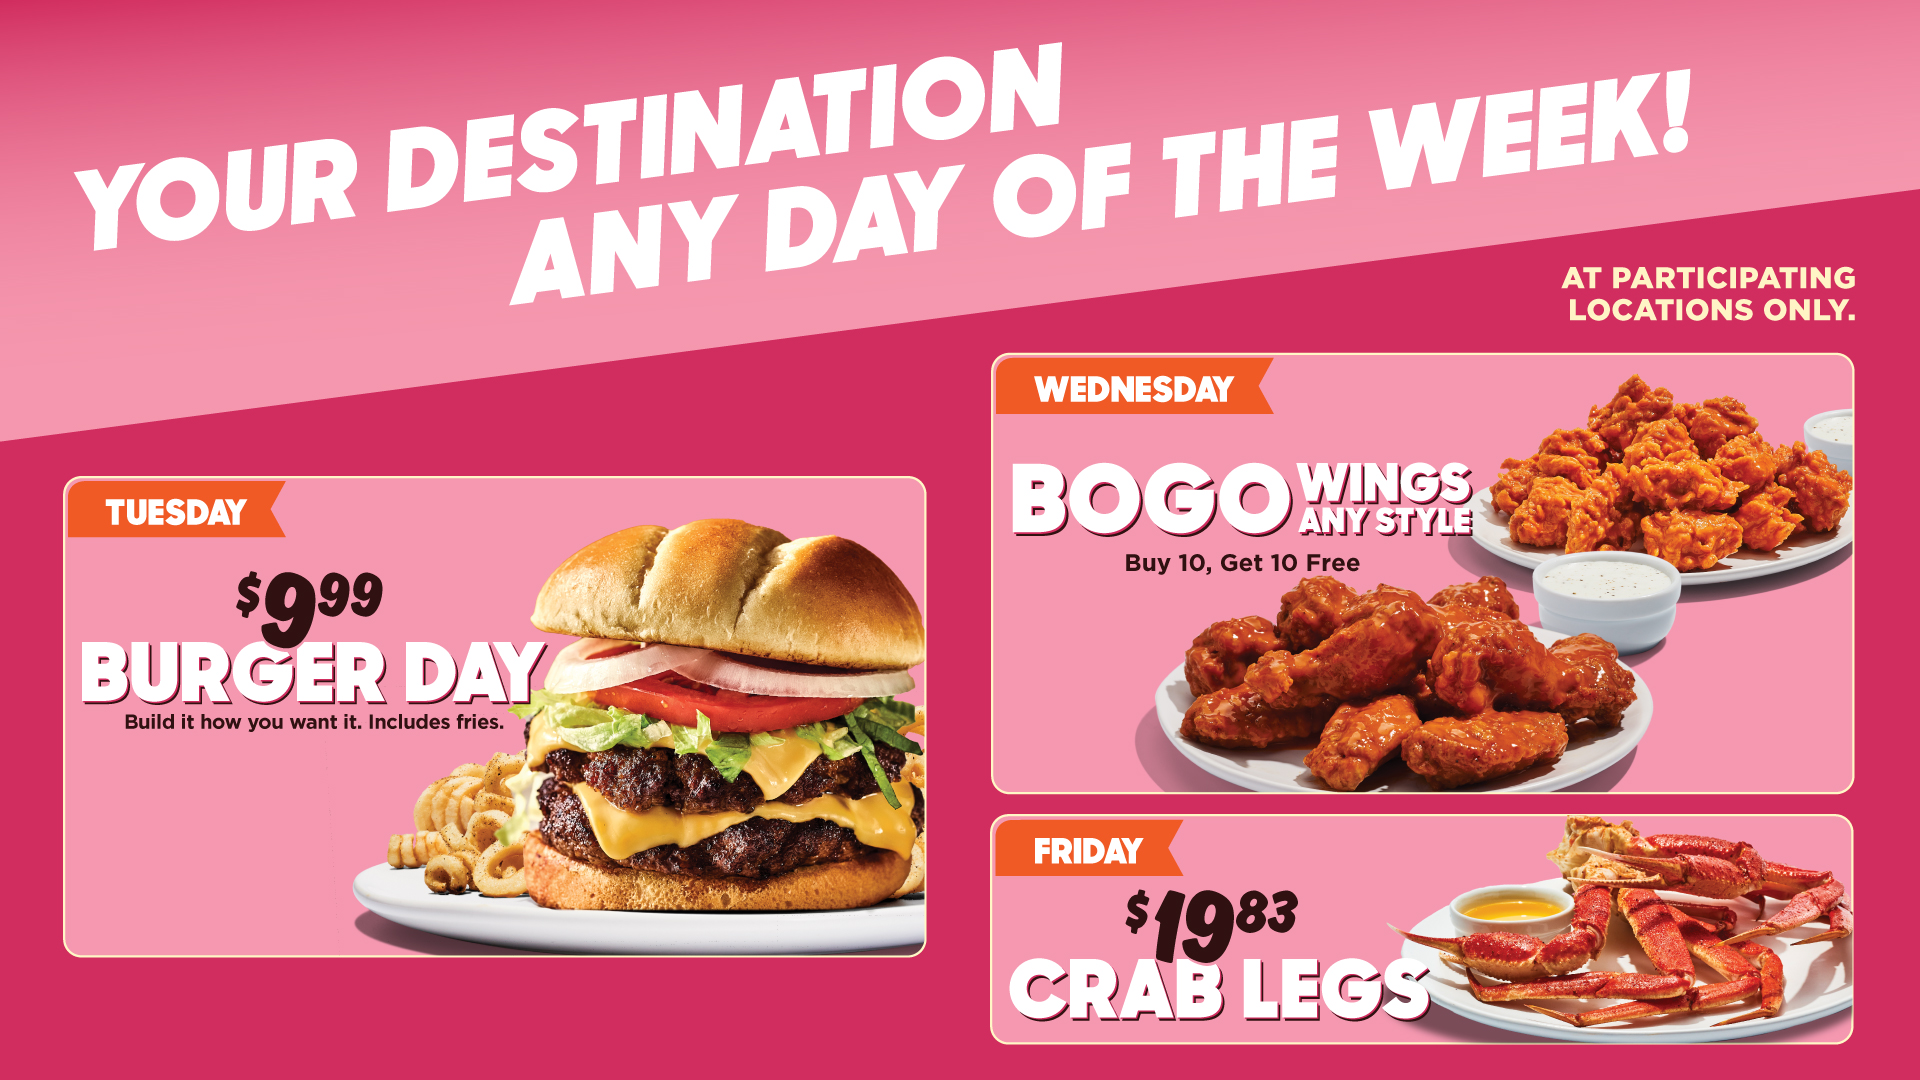 Your Destination Anyday of the Week!